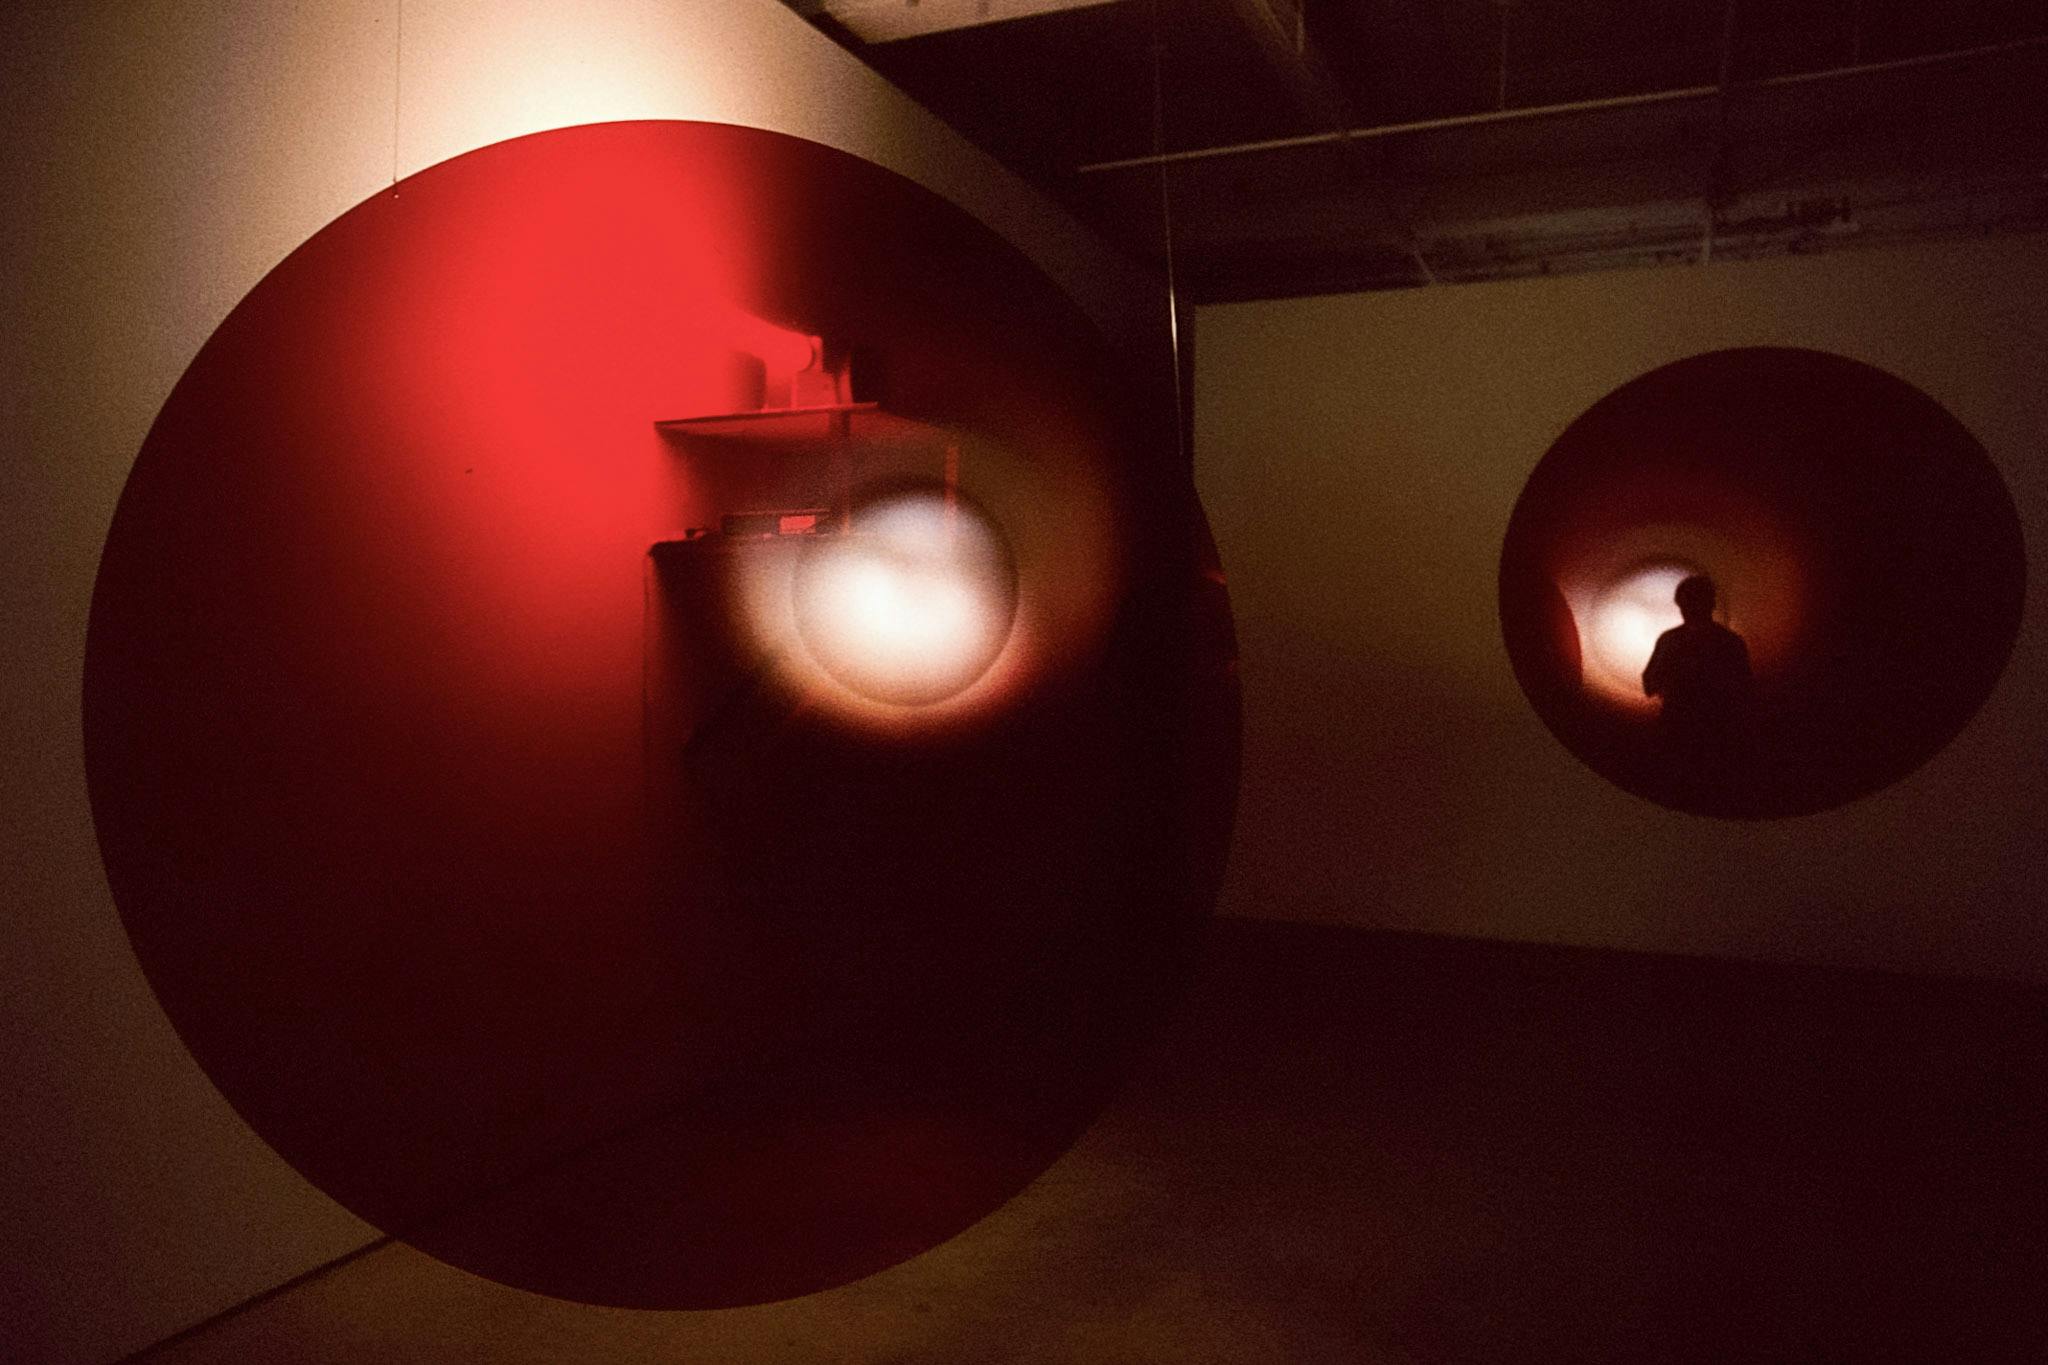 Two large circular-shaped thin red sculptures are visible in this photograph. Hanging from the gallery’s ceiling, these sculptures have a weak white light source placed slightly off-centered. 